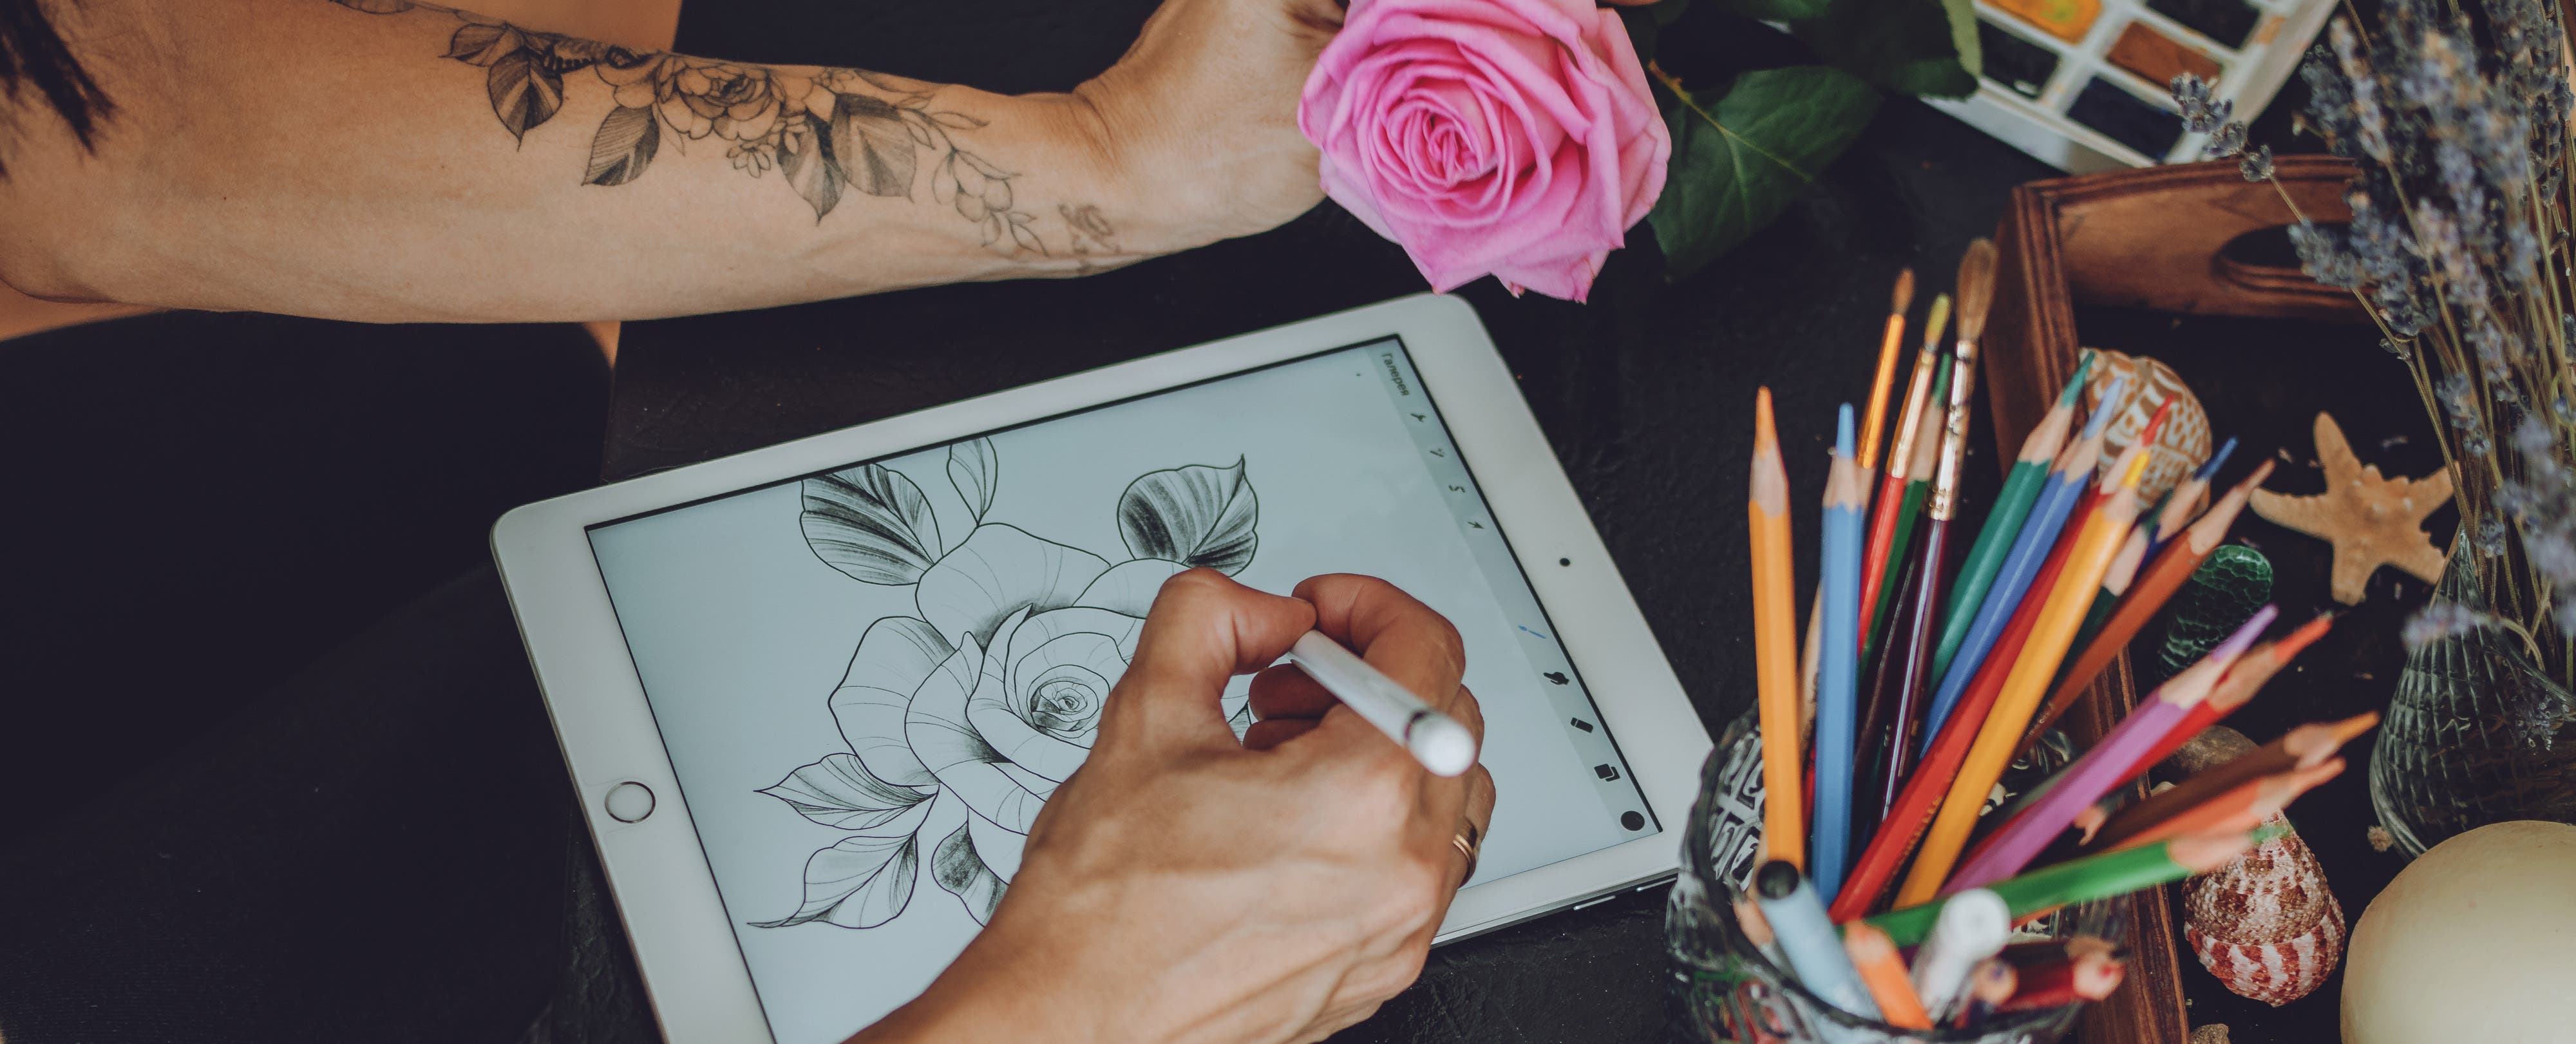 Barber DTS Tattoo Supplies - Tattoo Design Software and Apps: The Best for  2020 Are you using the best software or app available? #barberdts  #barberdtstattoosupplies #barberdtssupplies #ipad #procreate #apple  #applepencil #medibang #medibangpaint #